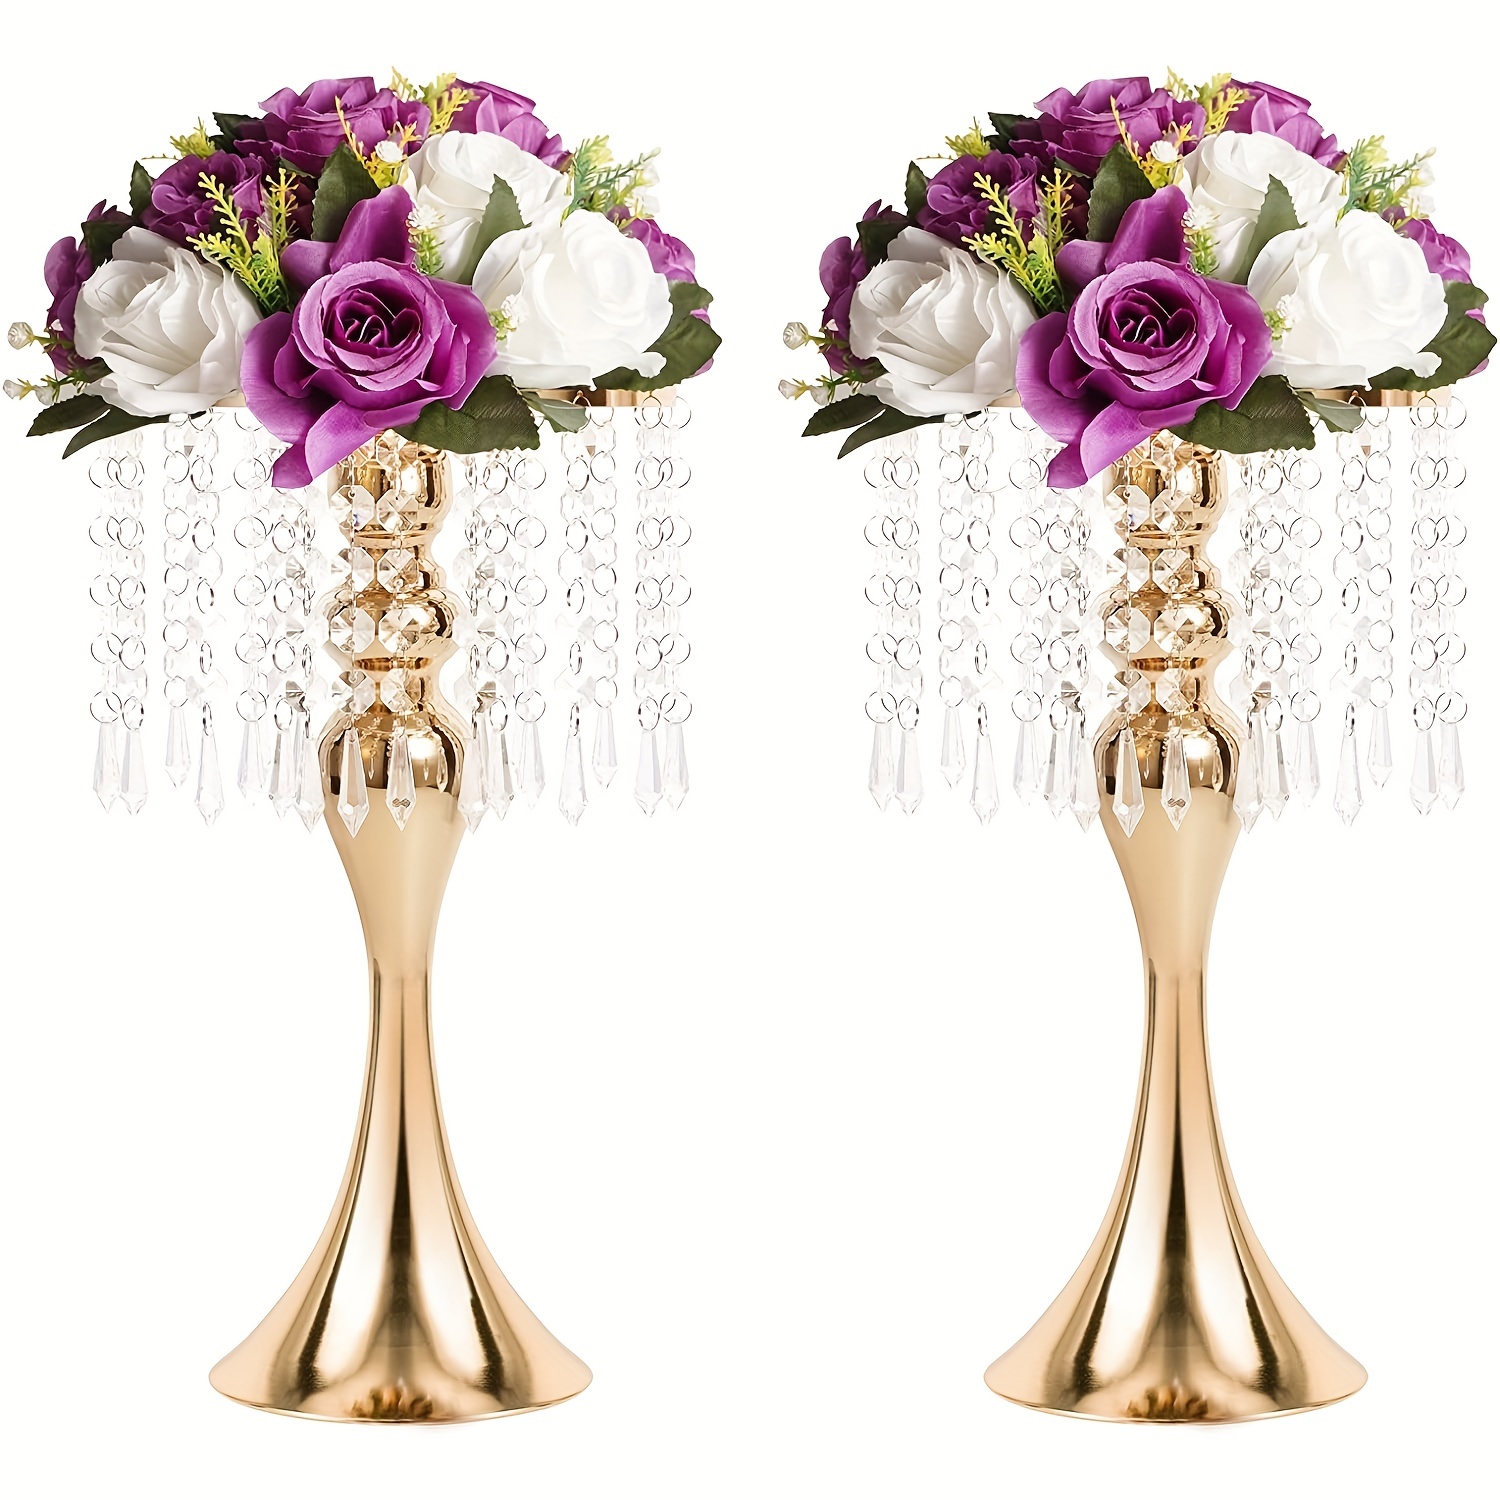 

2 Pcs Gold/sliver Vases For Centerpieces, 13in Crystal Flower Arrangement Stand, Wedding Centerpieces For Tables, Tall Metal Flower Vase Holders For Wedding, Event, Reception, Birthday, Home Decor